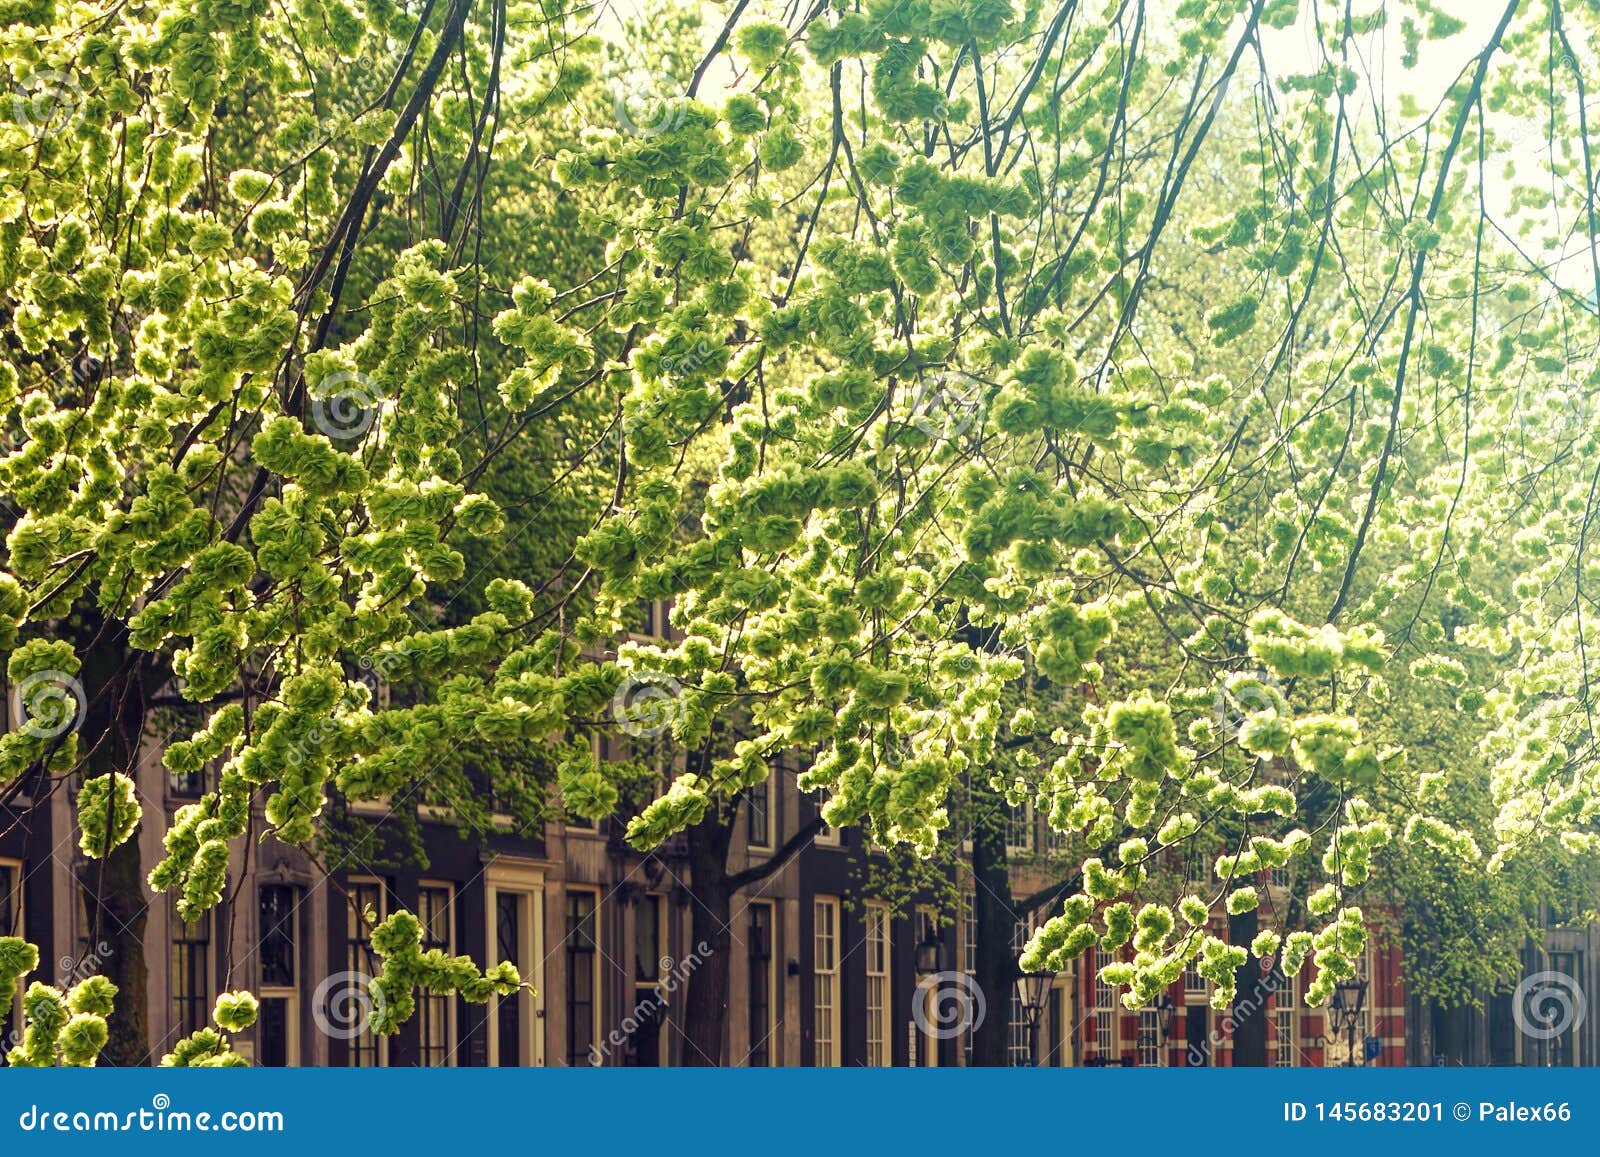 Spring Gently Green Flowering of Urban Trees. Background Stock Image